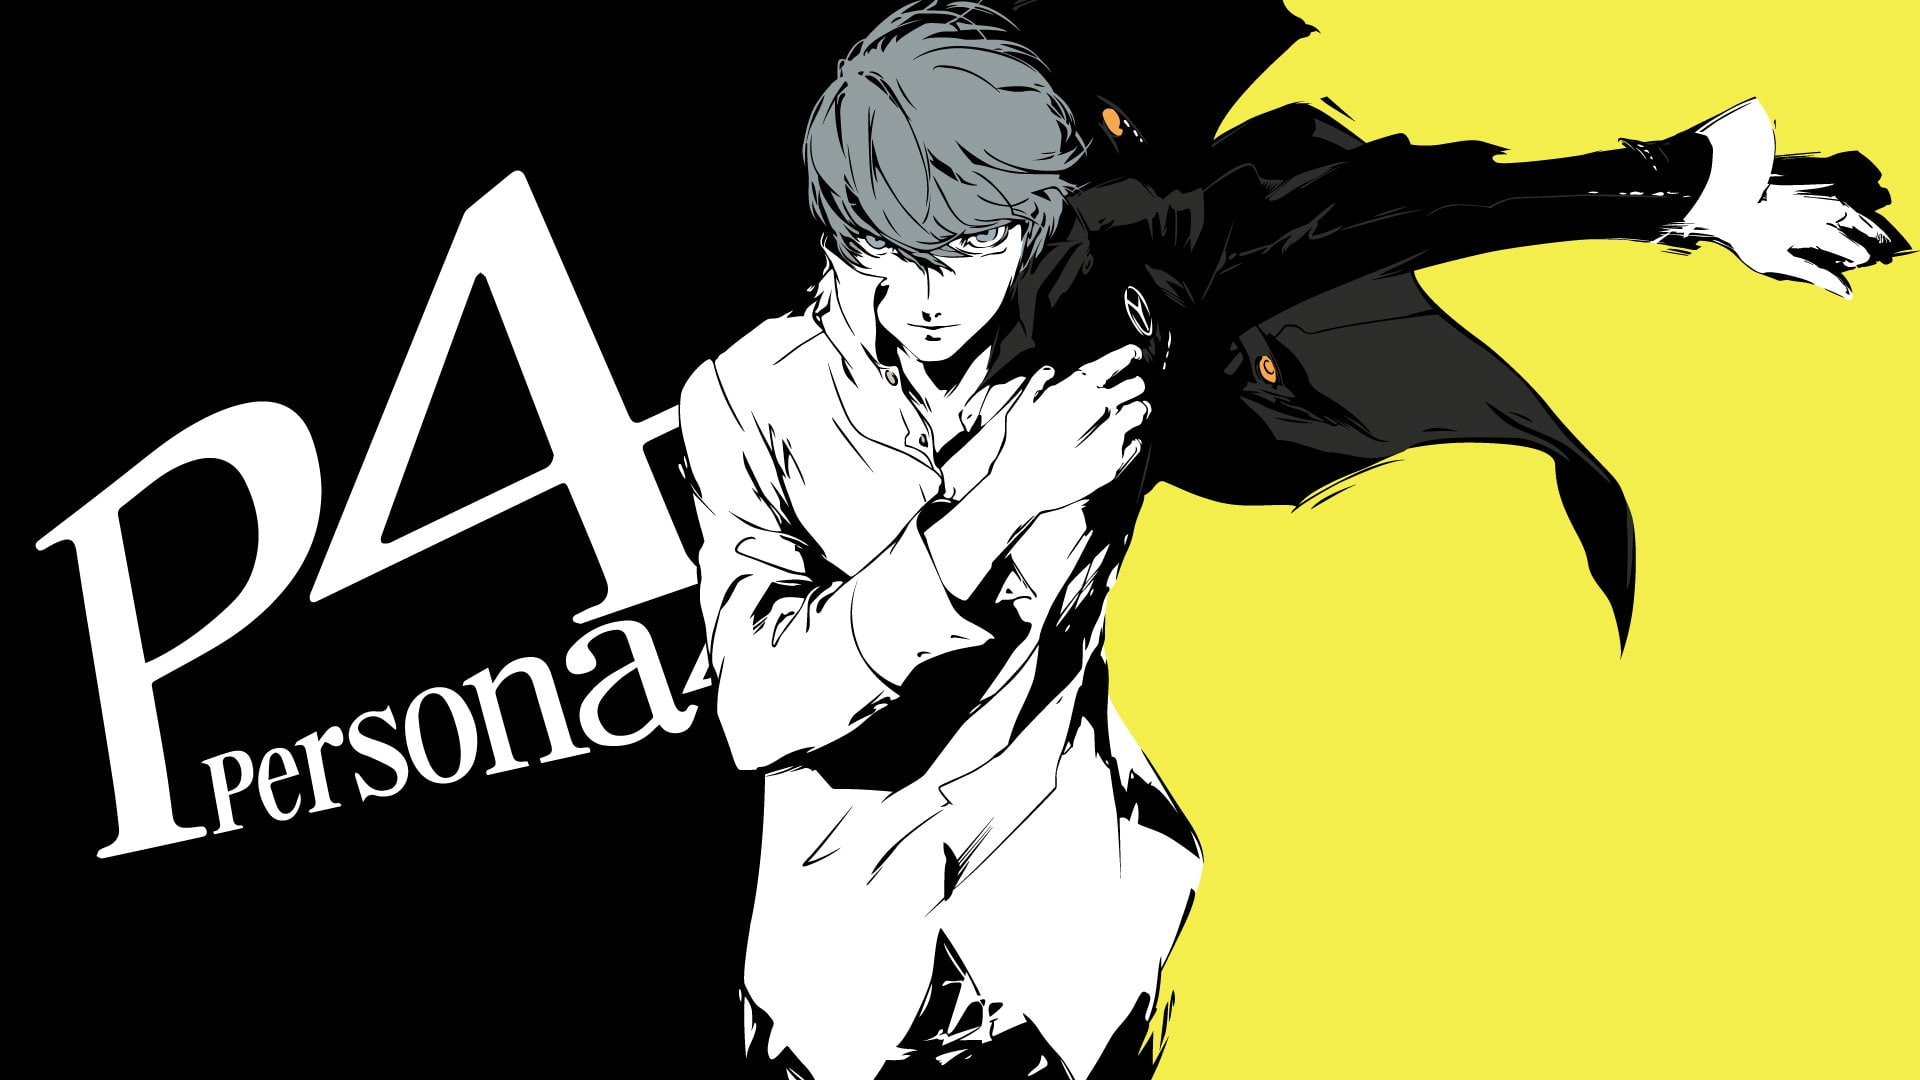 Anime 1920x1080 Persona 4 Persona series jacket video game characters video games anime boys anime anime games selective coloring